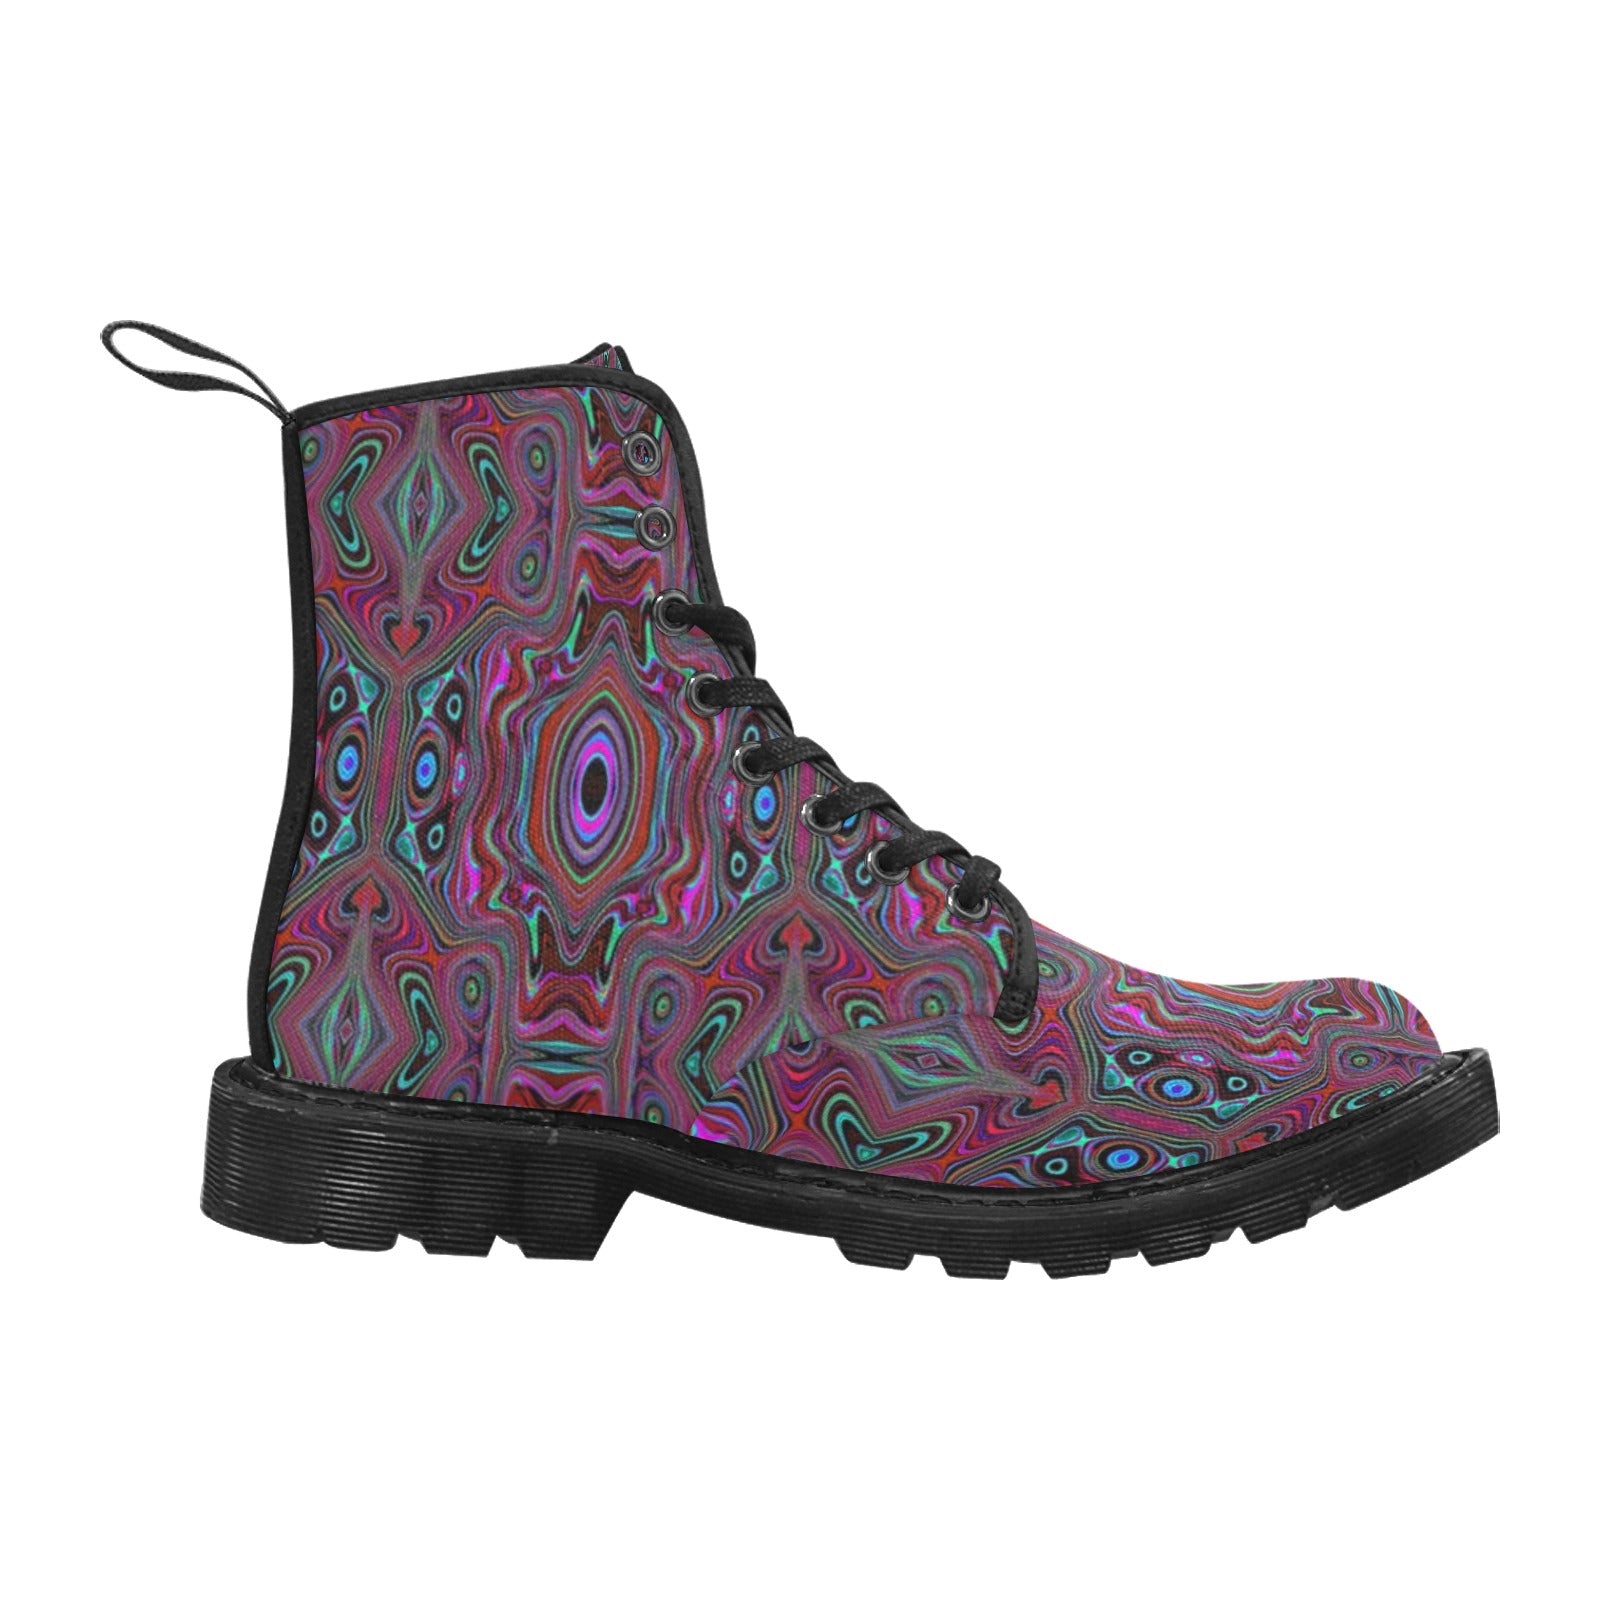 Boots for Women, Trippy Seafoam Green and Magenta Abstract Pattern - Black